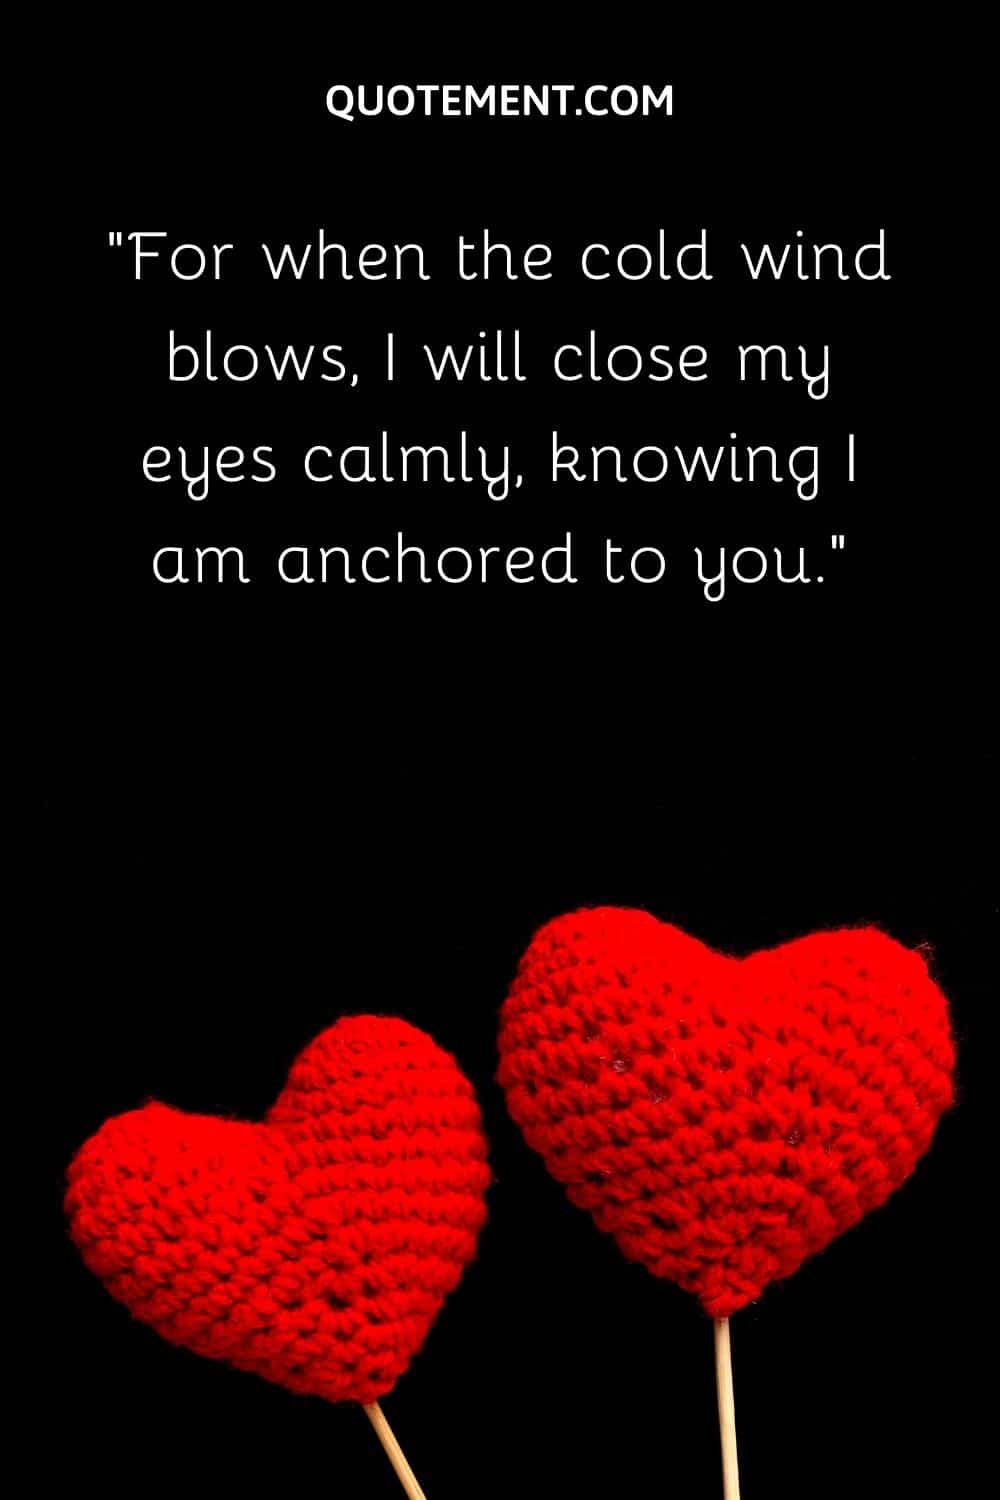 For when the cold wind blows, I will close my eyes calmly, knowing I am anchored to you.